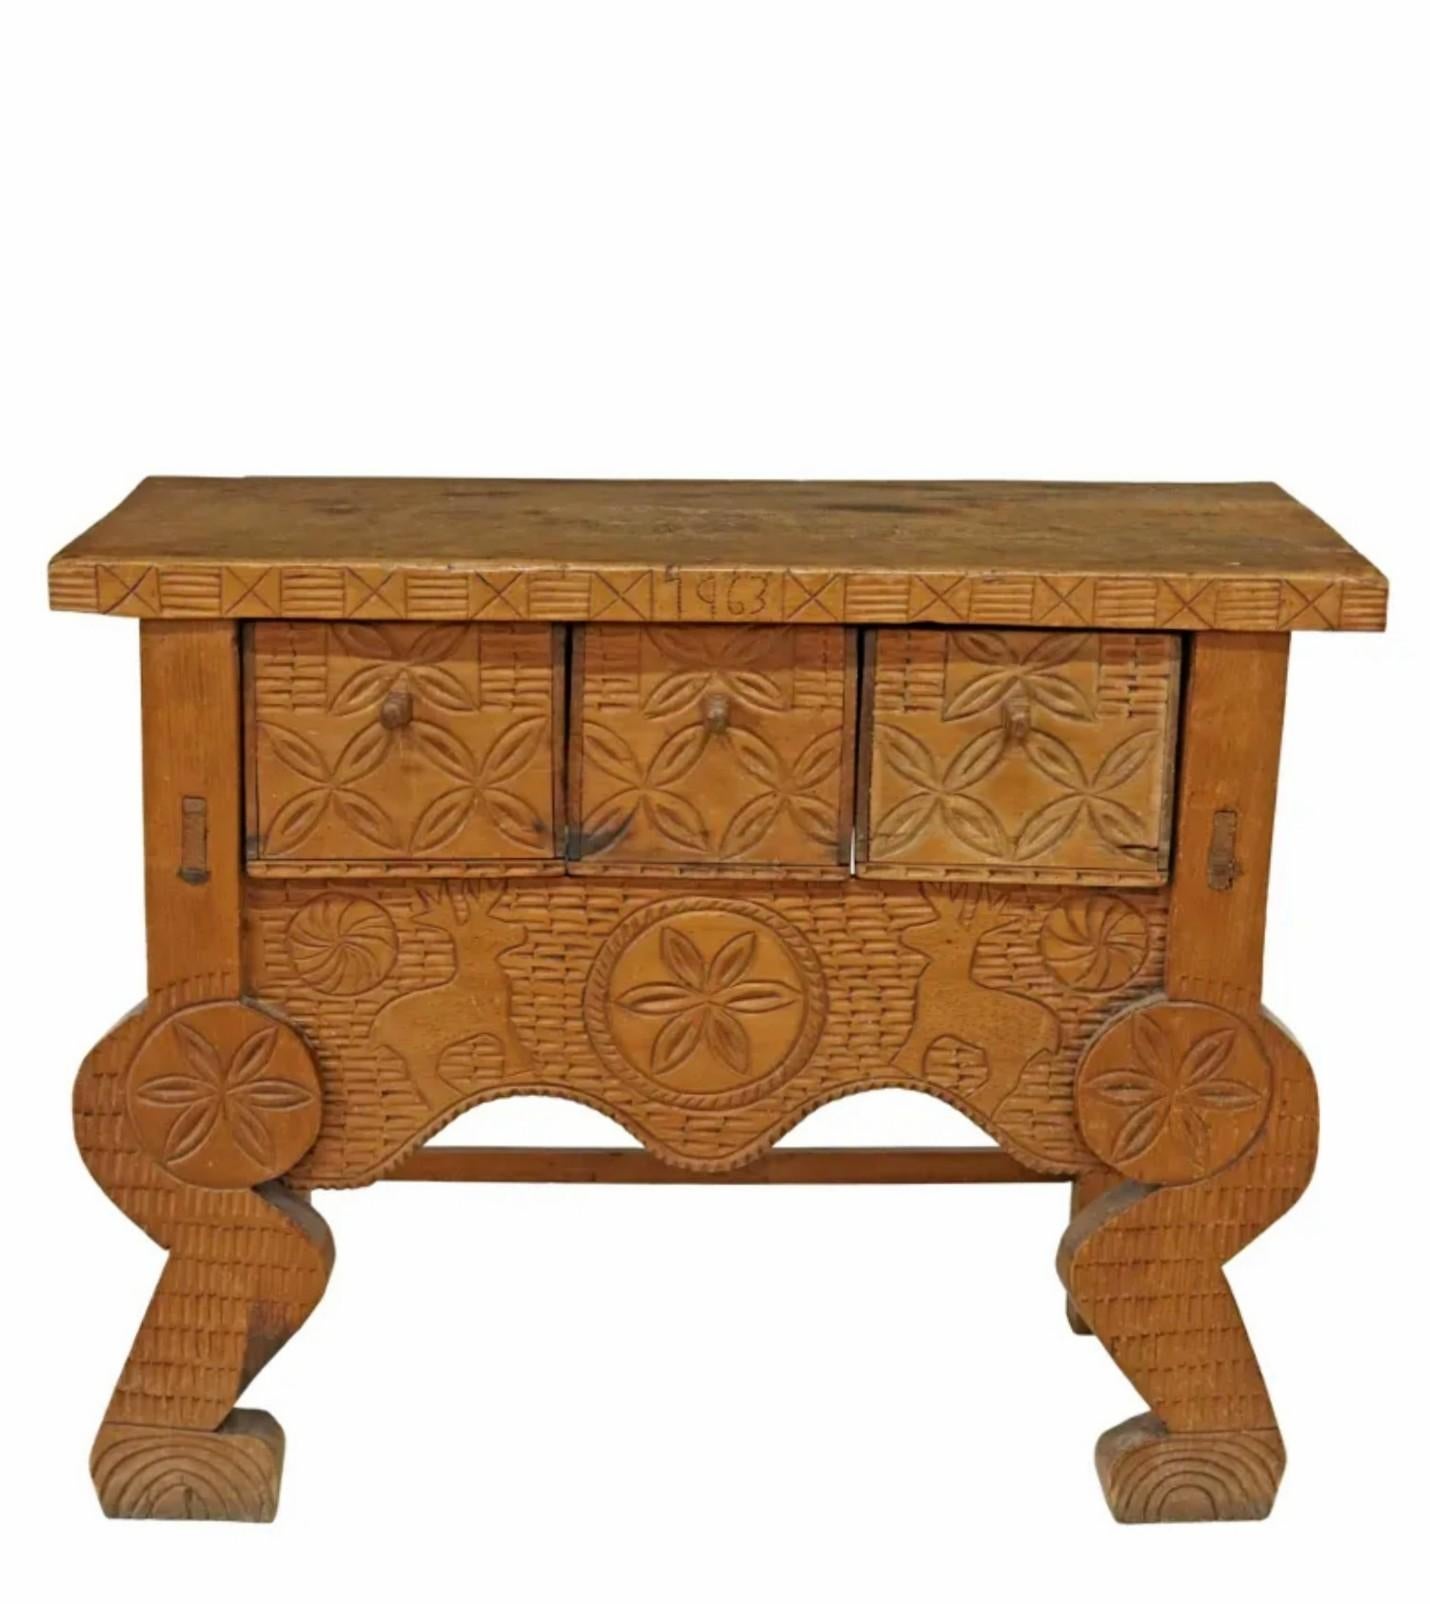 A rare Guatemalan hand carved wood console table with nicely aged warm rustic patina. 

Handmade in Nahuala, Guatemala, in the mid-20th century, primitive hand-crafted construction, quality mortise tenon joinery, the rustic Central American folk